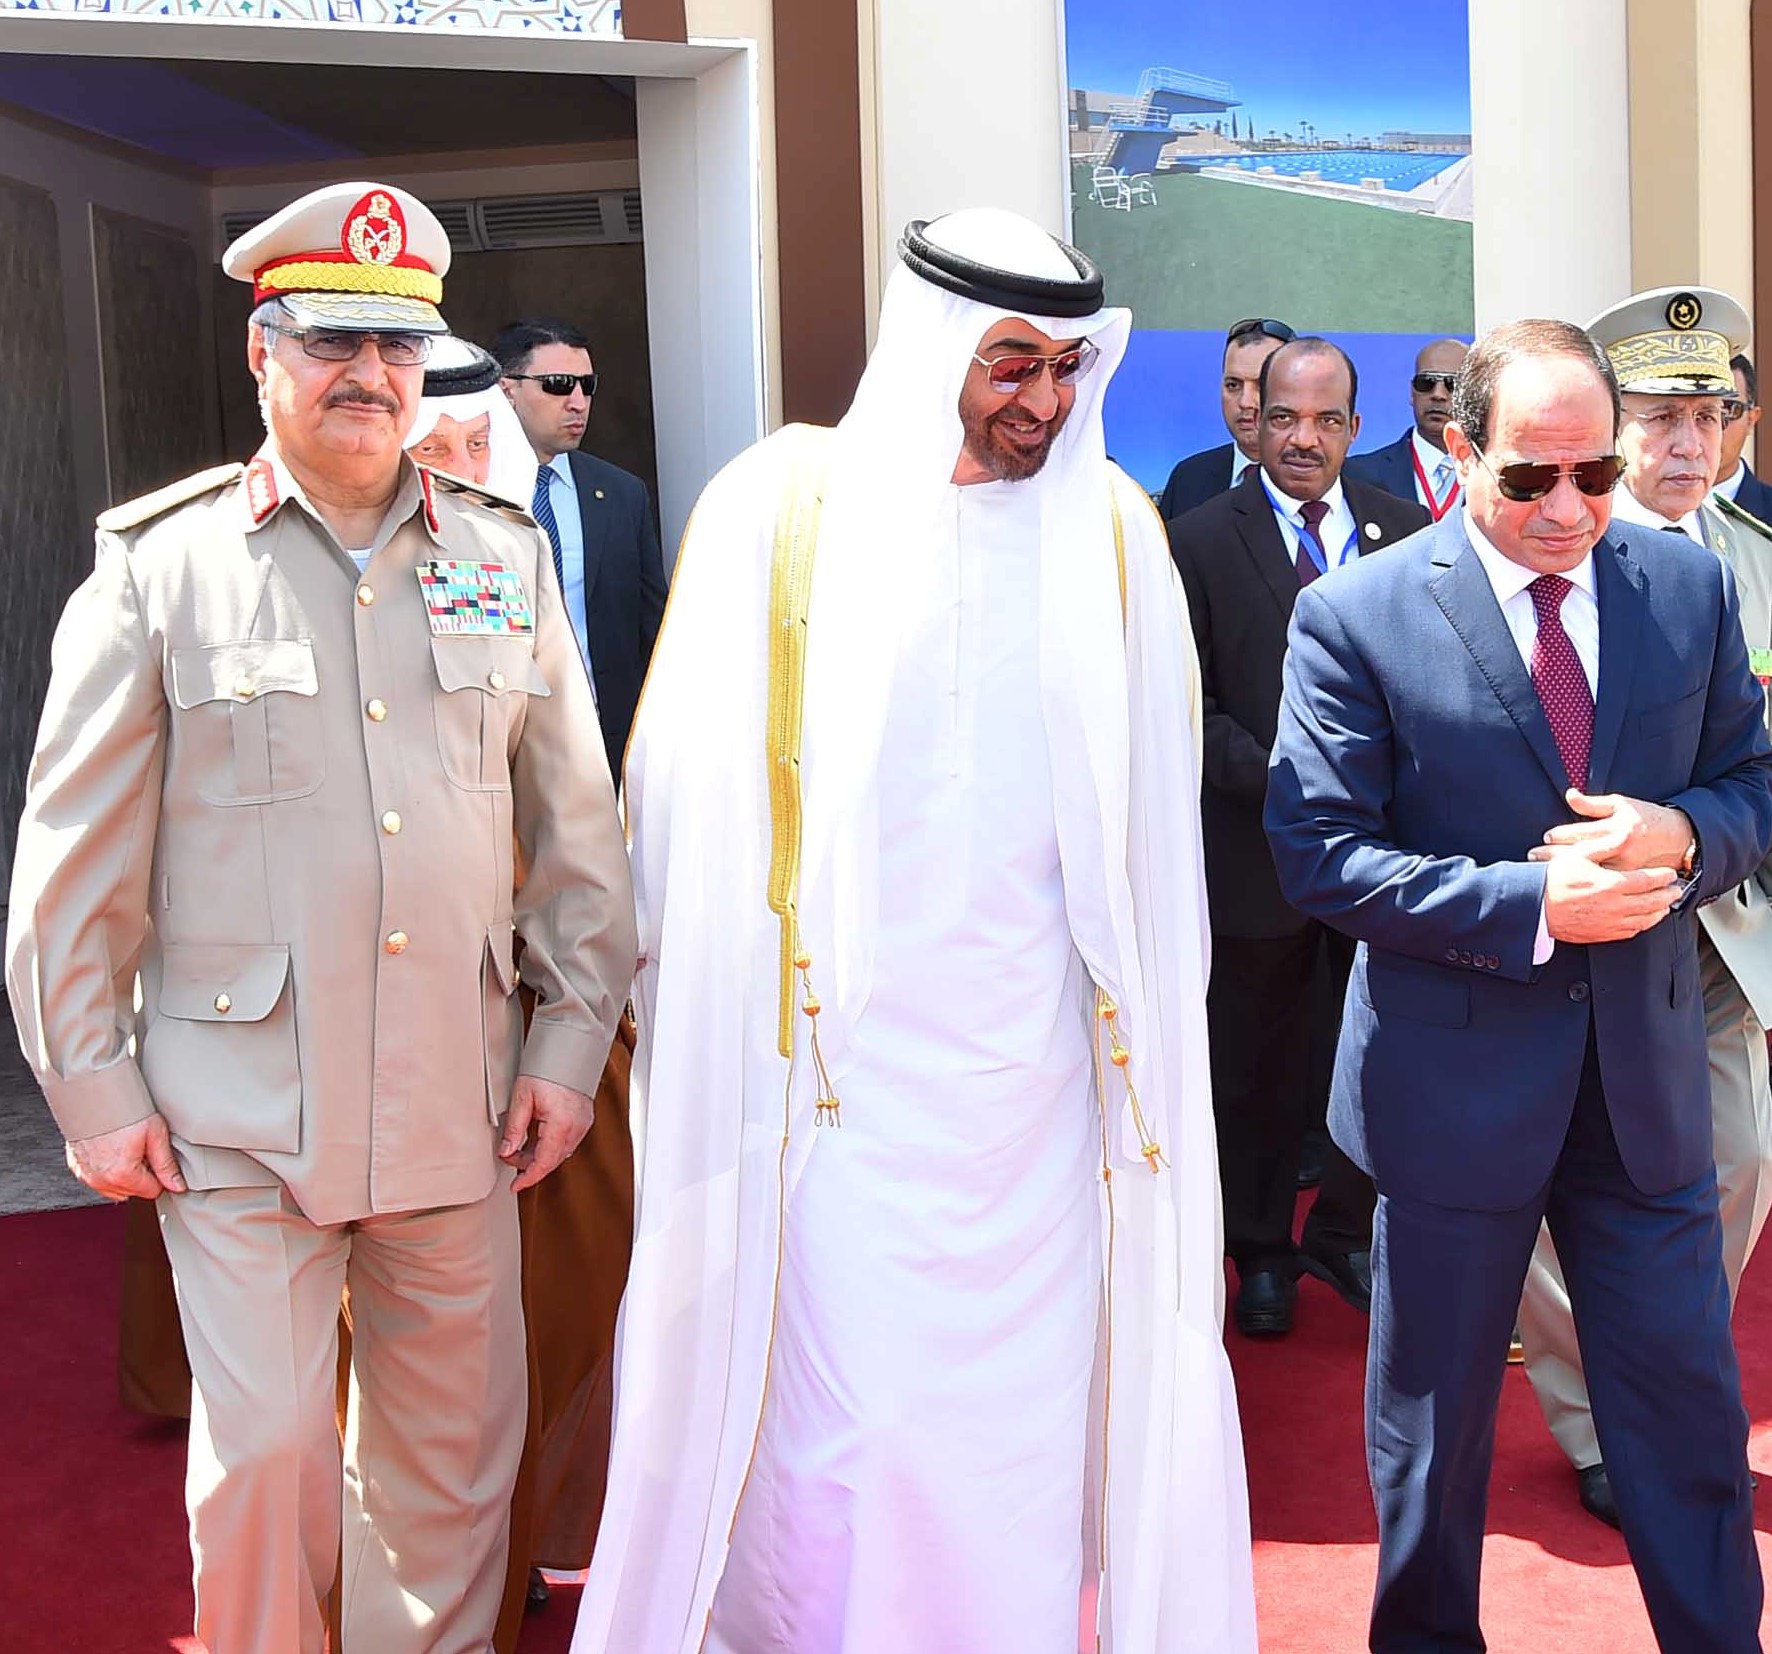  Egyptian president (R) arrives with Arab leaders Sheikh Mohammed bin Zayed (C), Crown Prince of Abu Dhabi, and General Khalifa Haftar on 22 July, 2017 (Reuters) 